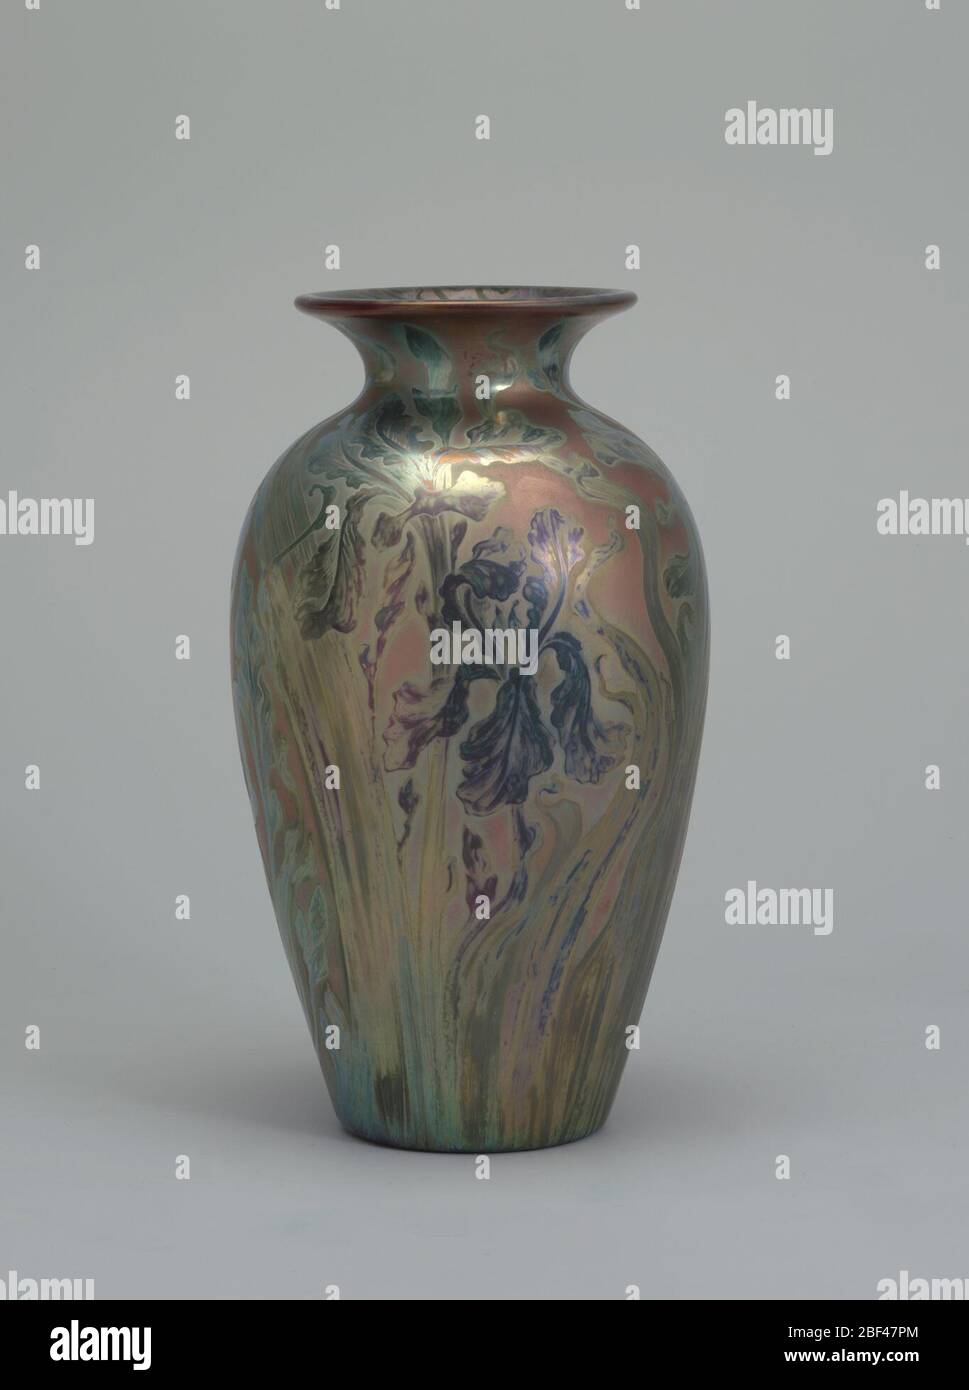 Vase. Gray-white clay body, cast. Monumental elongated ovoid body with flaring rim; no foot. Decorated with full-length irises in full bloom with slightly whiplash leaves and stems that extend up over the body and shoulder. Stock Photo